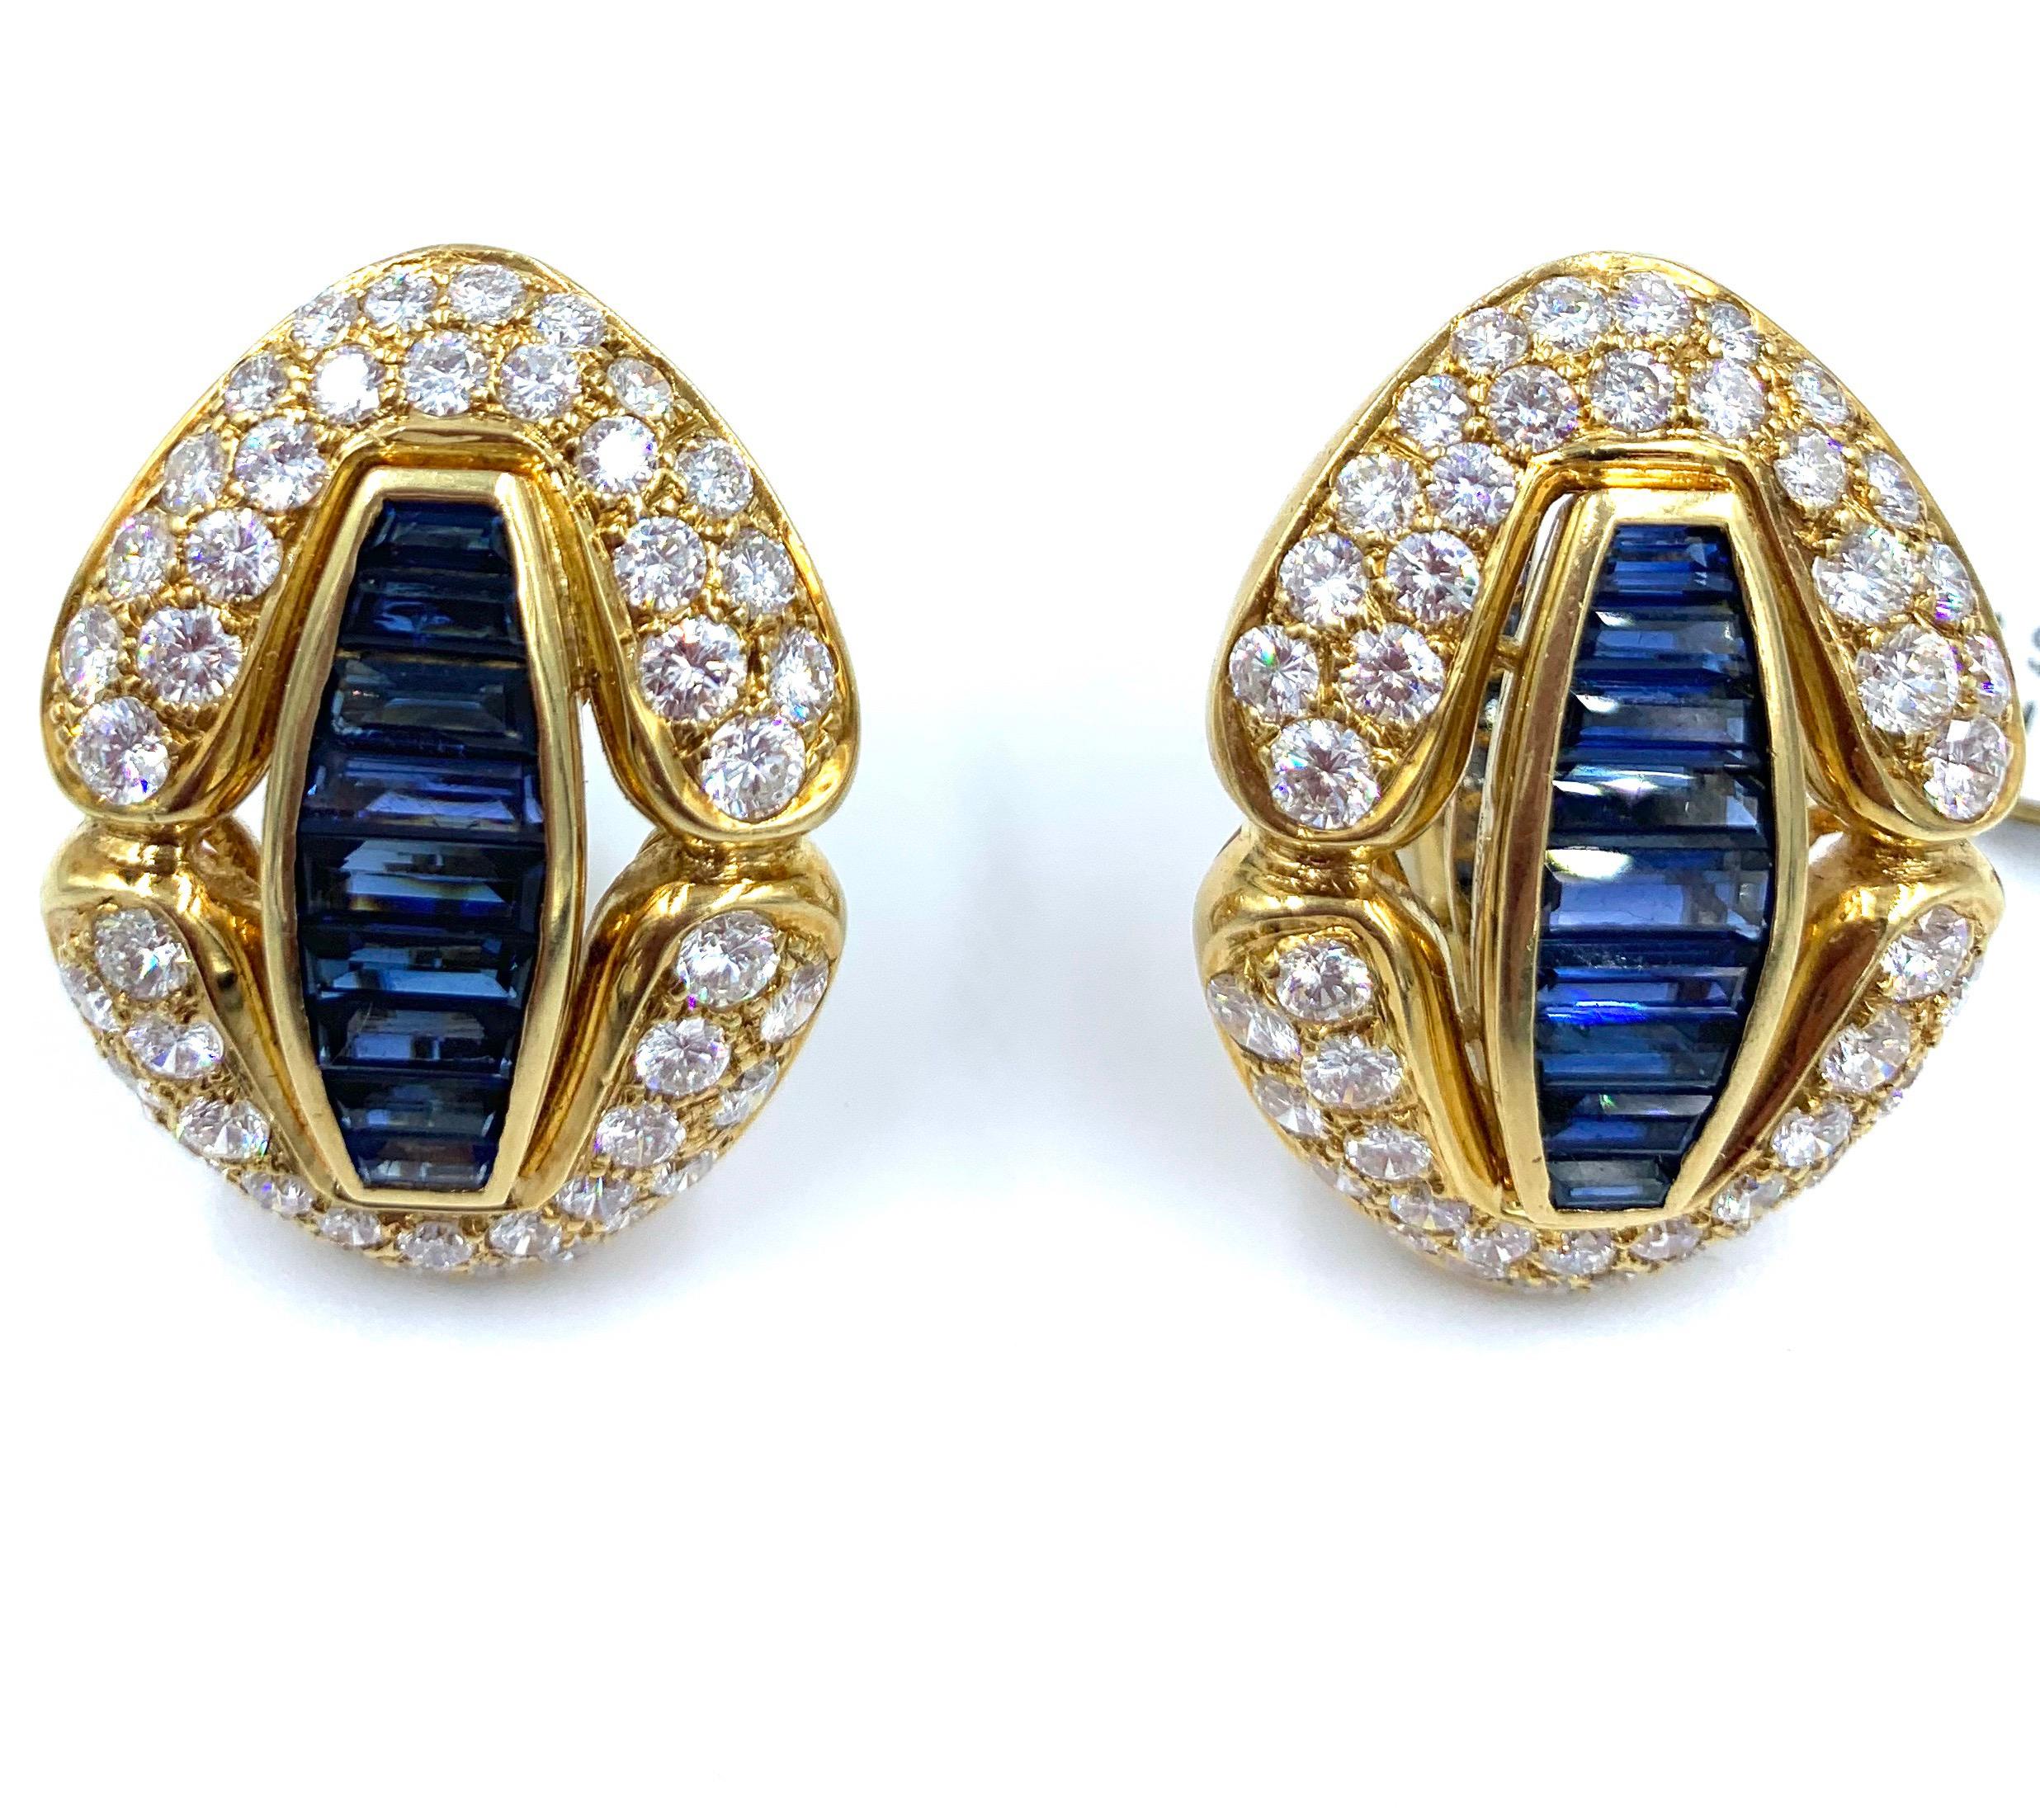 Uniquely designed, these lovely solid 18k yellow gold earrings are adorned with sapphires and diamonds. In the center, a row of beautifully cut sapphire baguettes,  totaling 6 carats. Surrounding the sapphires, are two shapes that create the effect